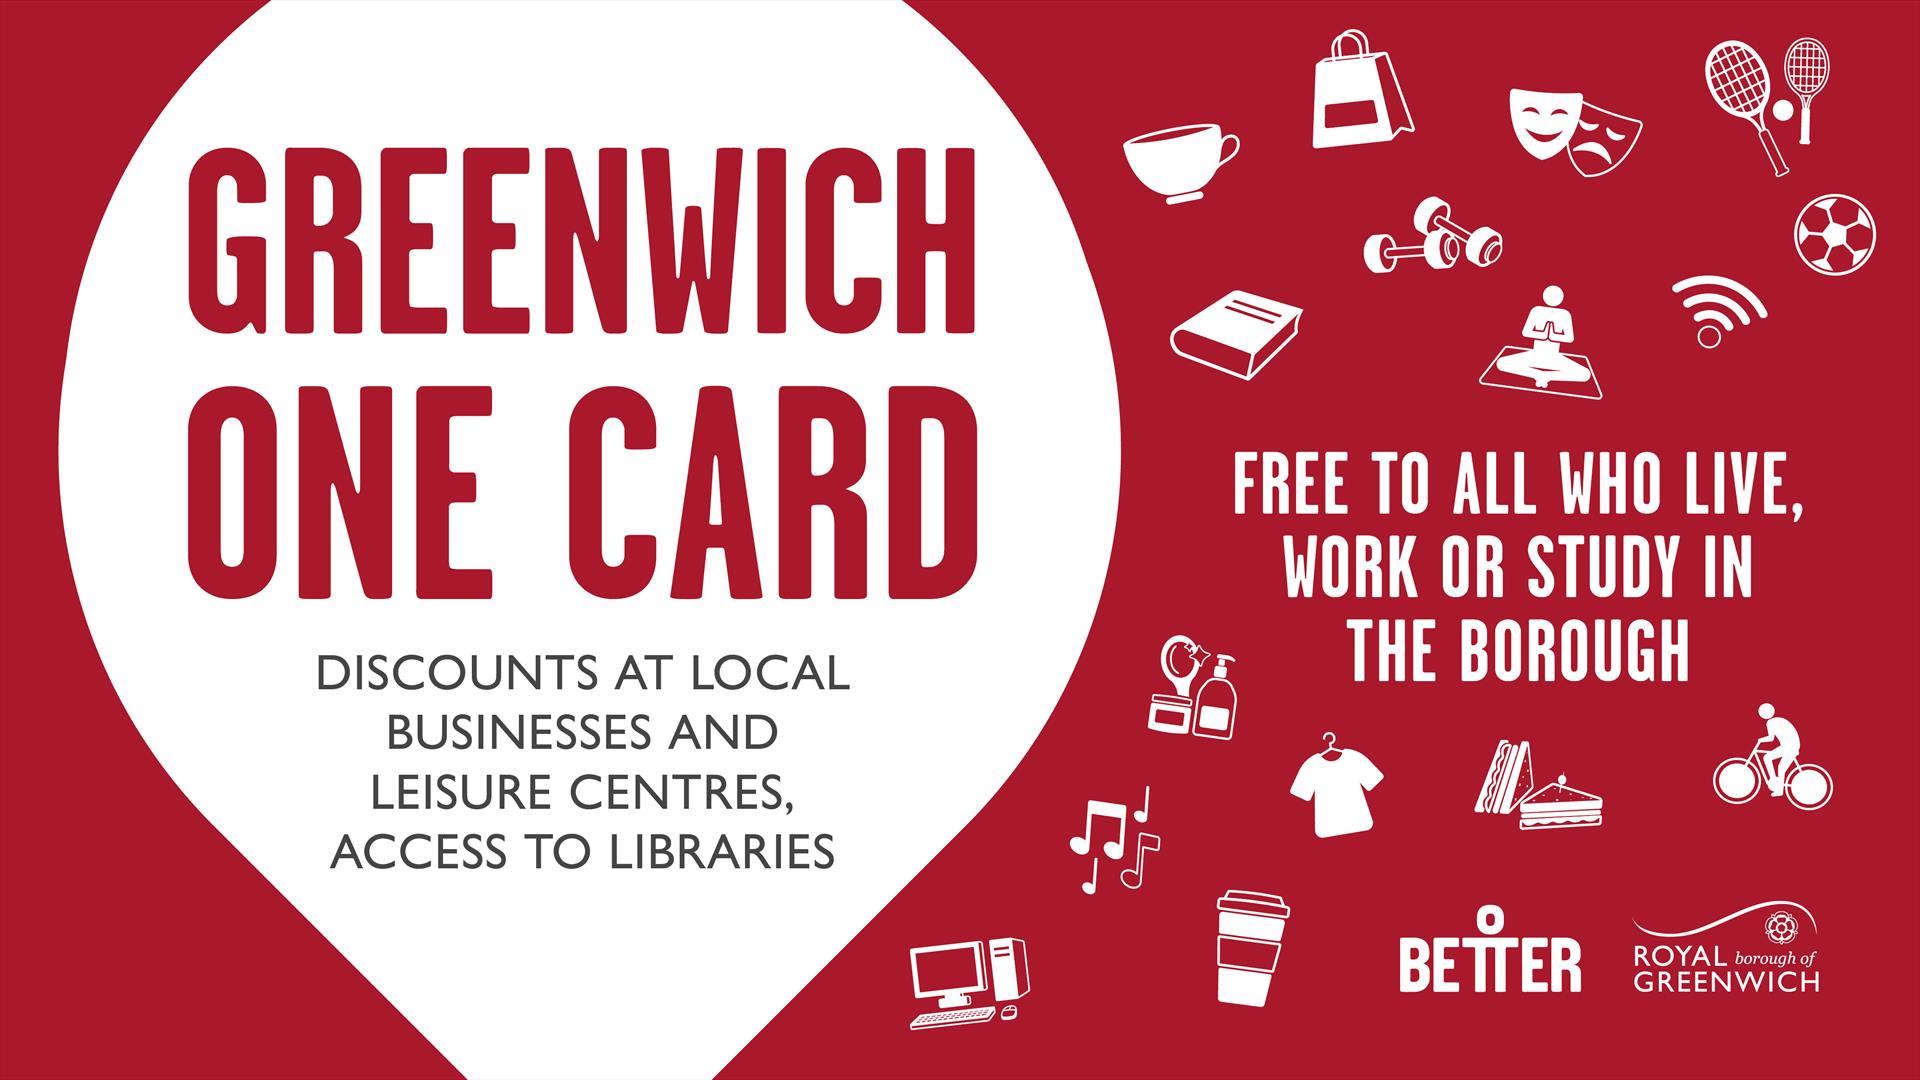 Artwork for the Greenwich One Card